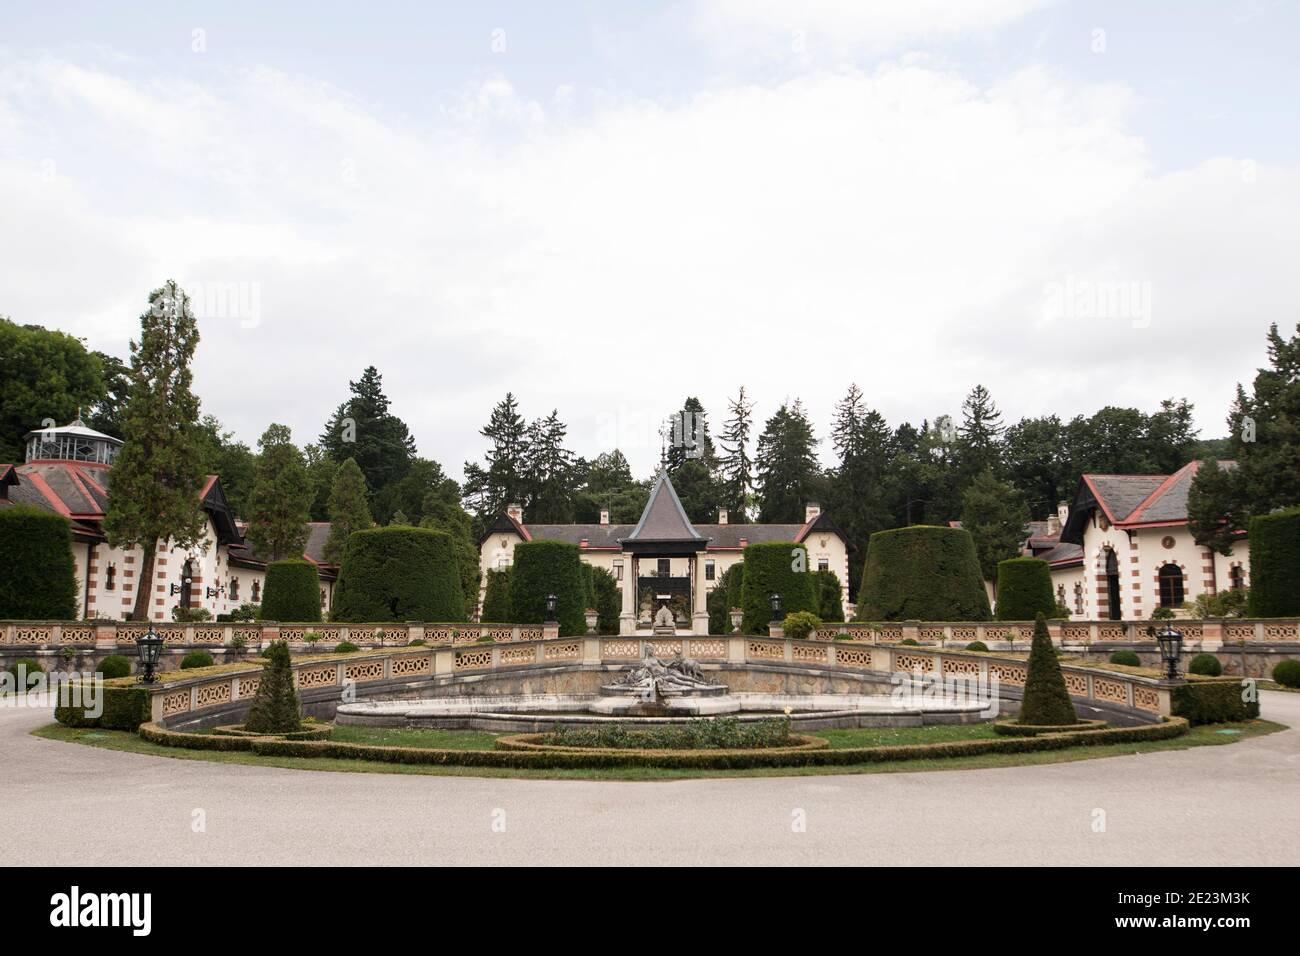 The Tilgnerbrunnen fountain and courtyard at Hermesvilla, the country house of Habsburg Empress Elisabeth (Sisi), on the outskirts of Vienna, Austria. Stock Photo